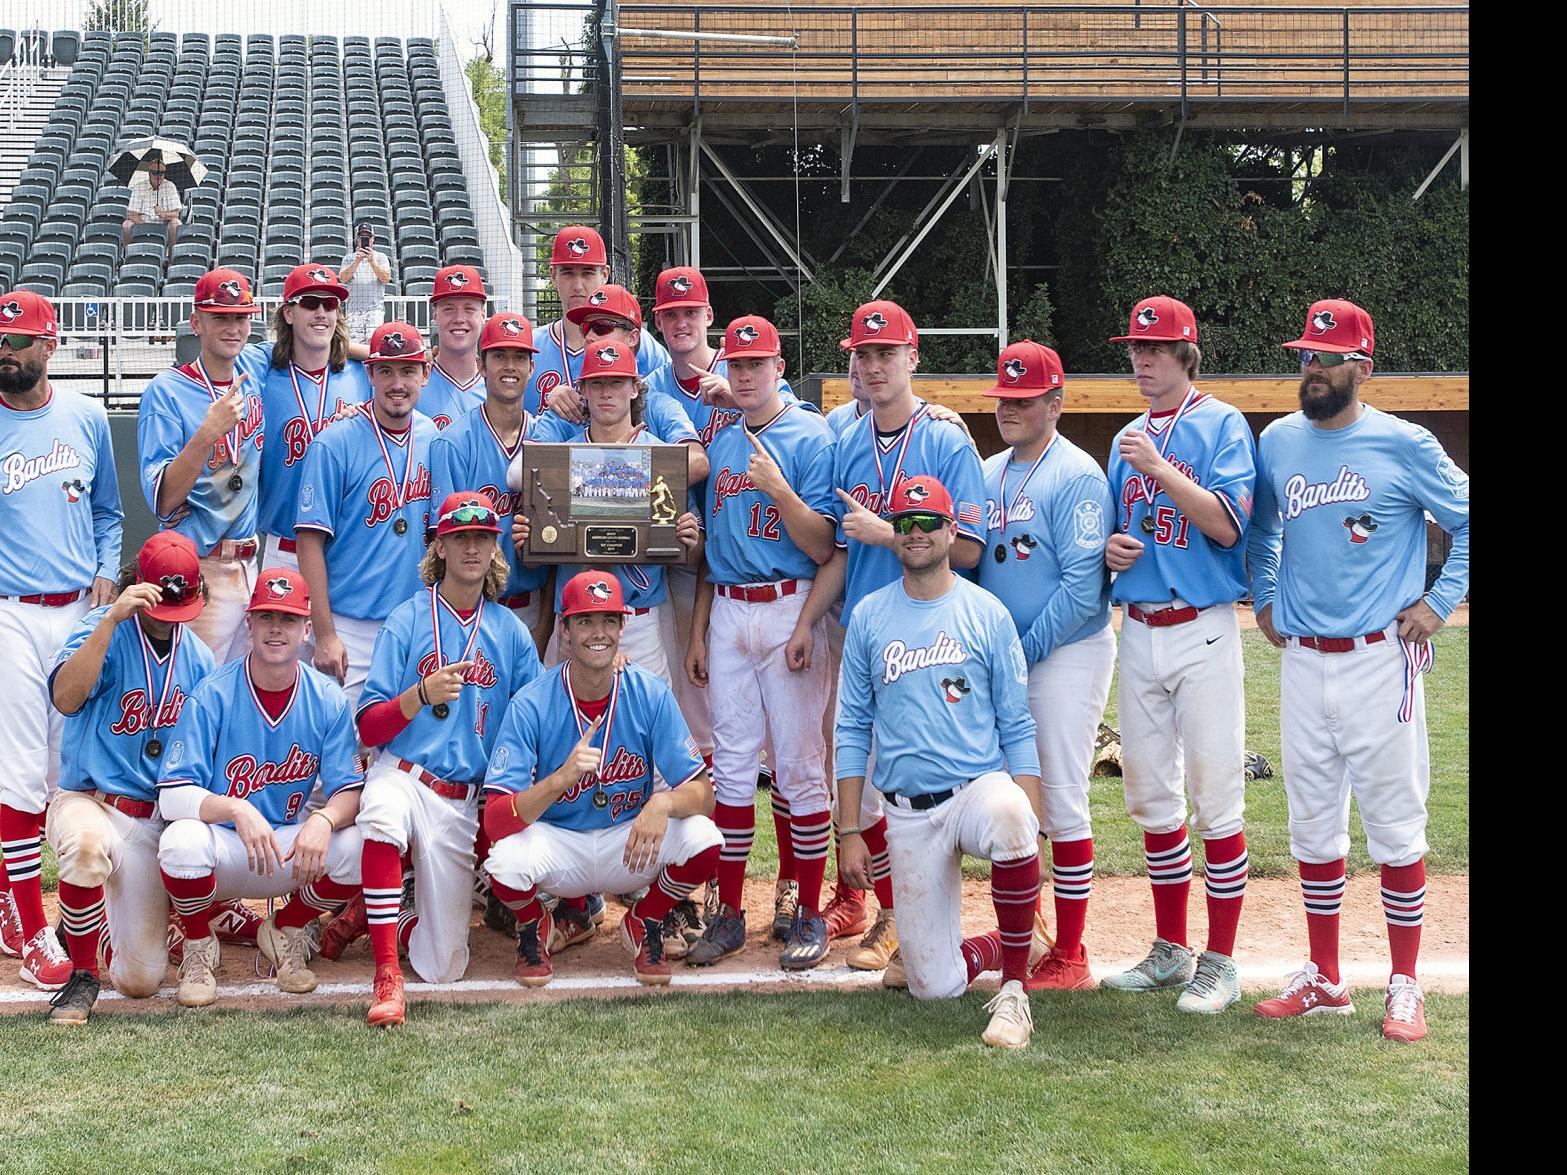 Bandits claim Double-A state championship